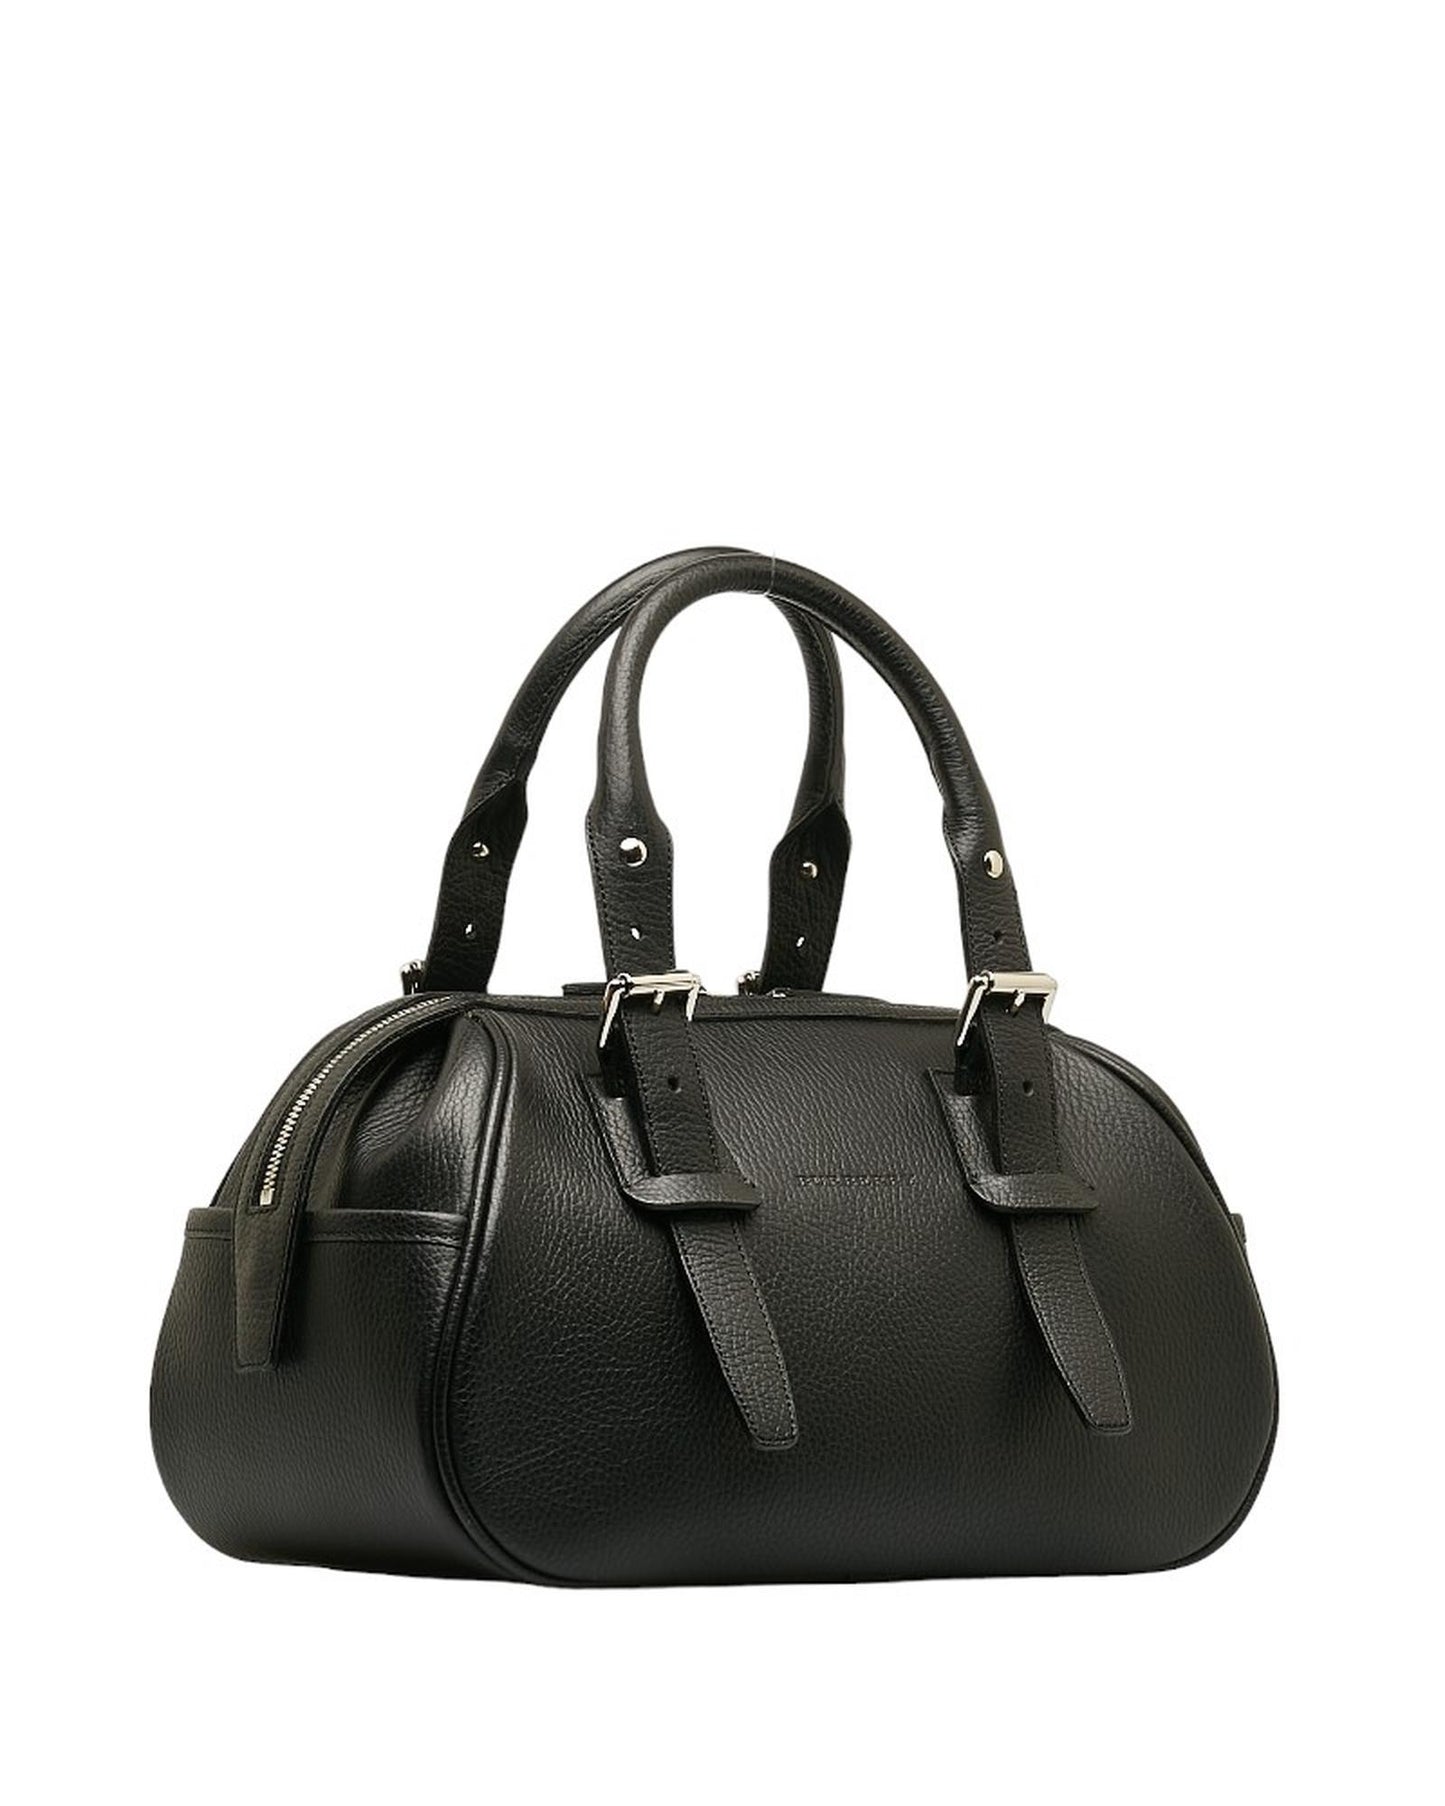 Burberry Women's Leather Belted Boston Bag in Black